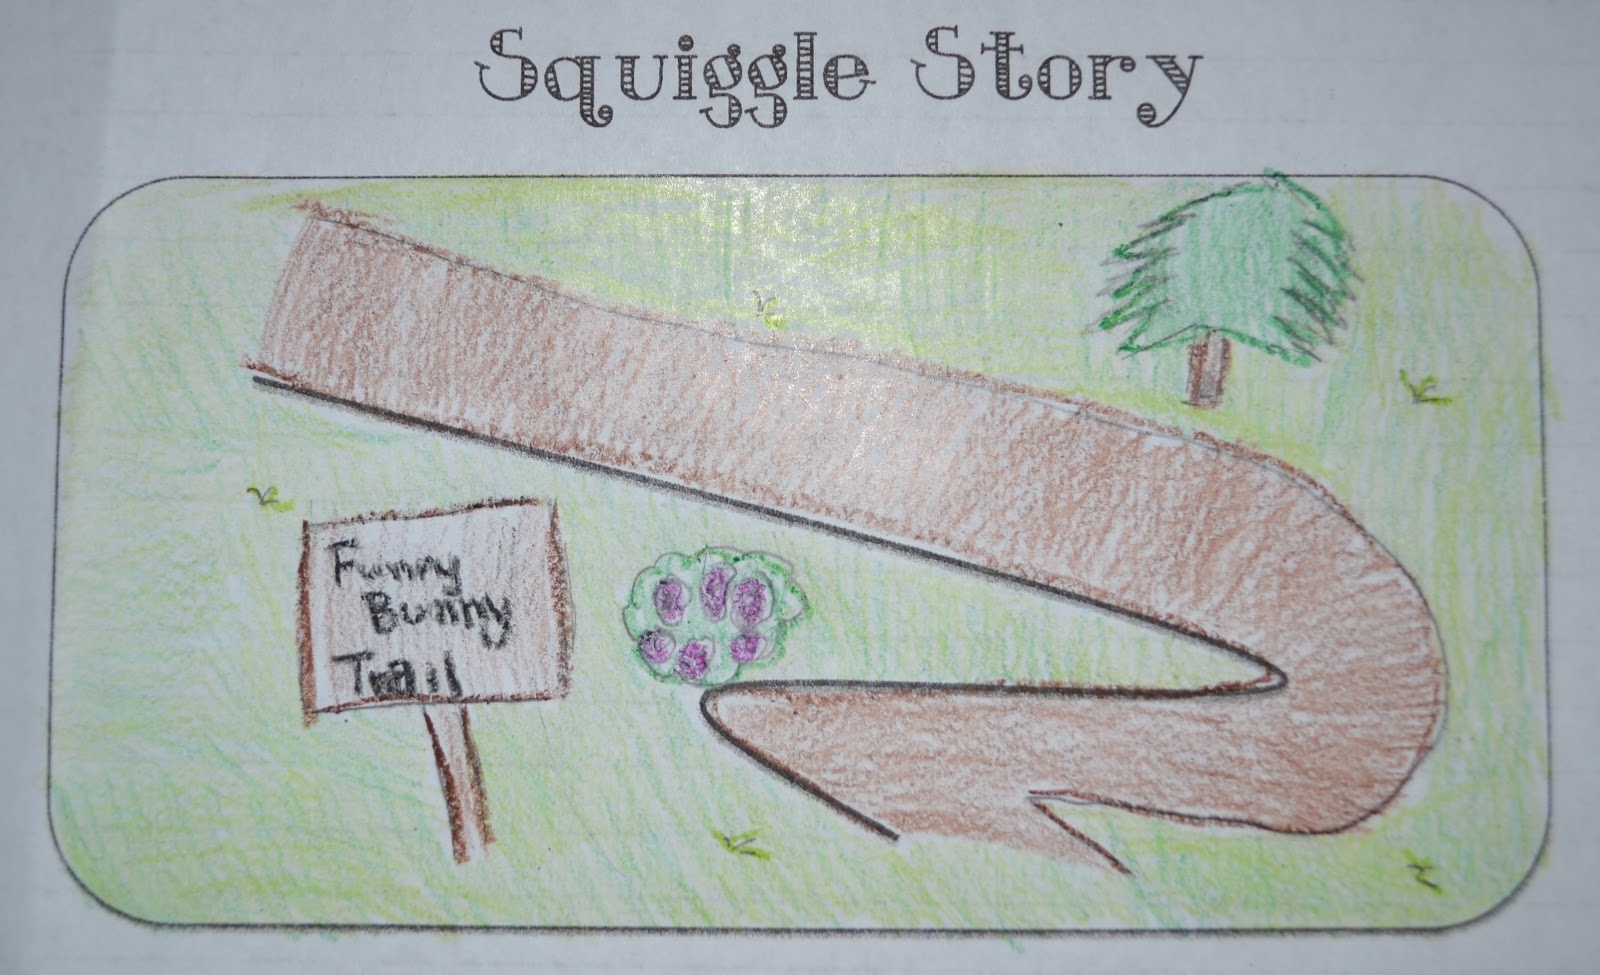 What The Teacher Wants!: Squiggle Stories! - Free Squiggle Story Printable